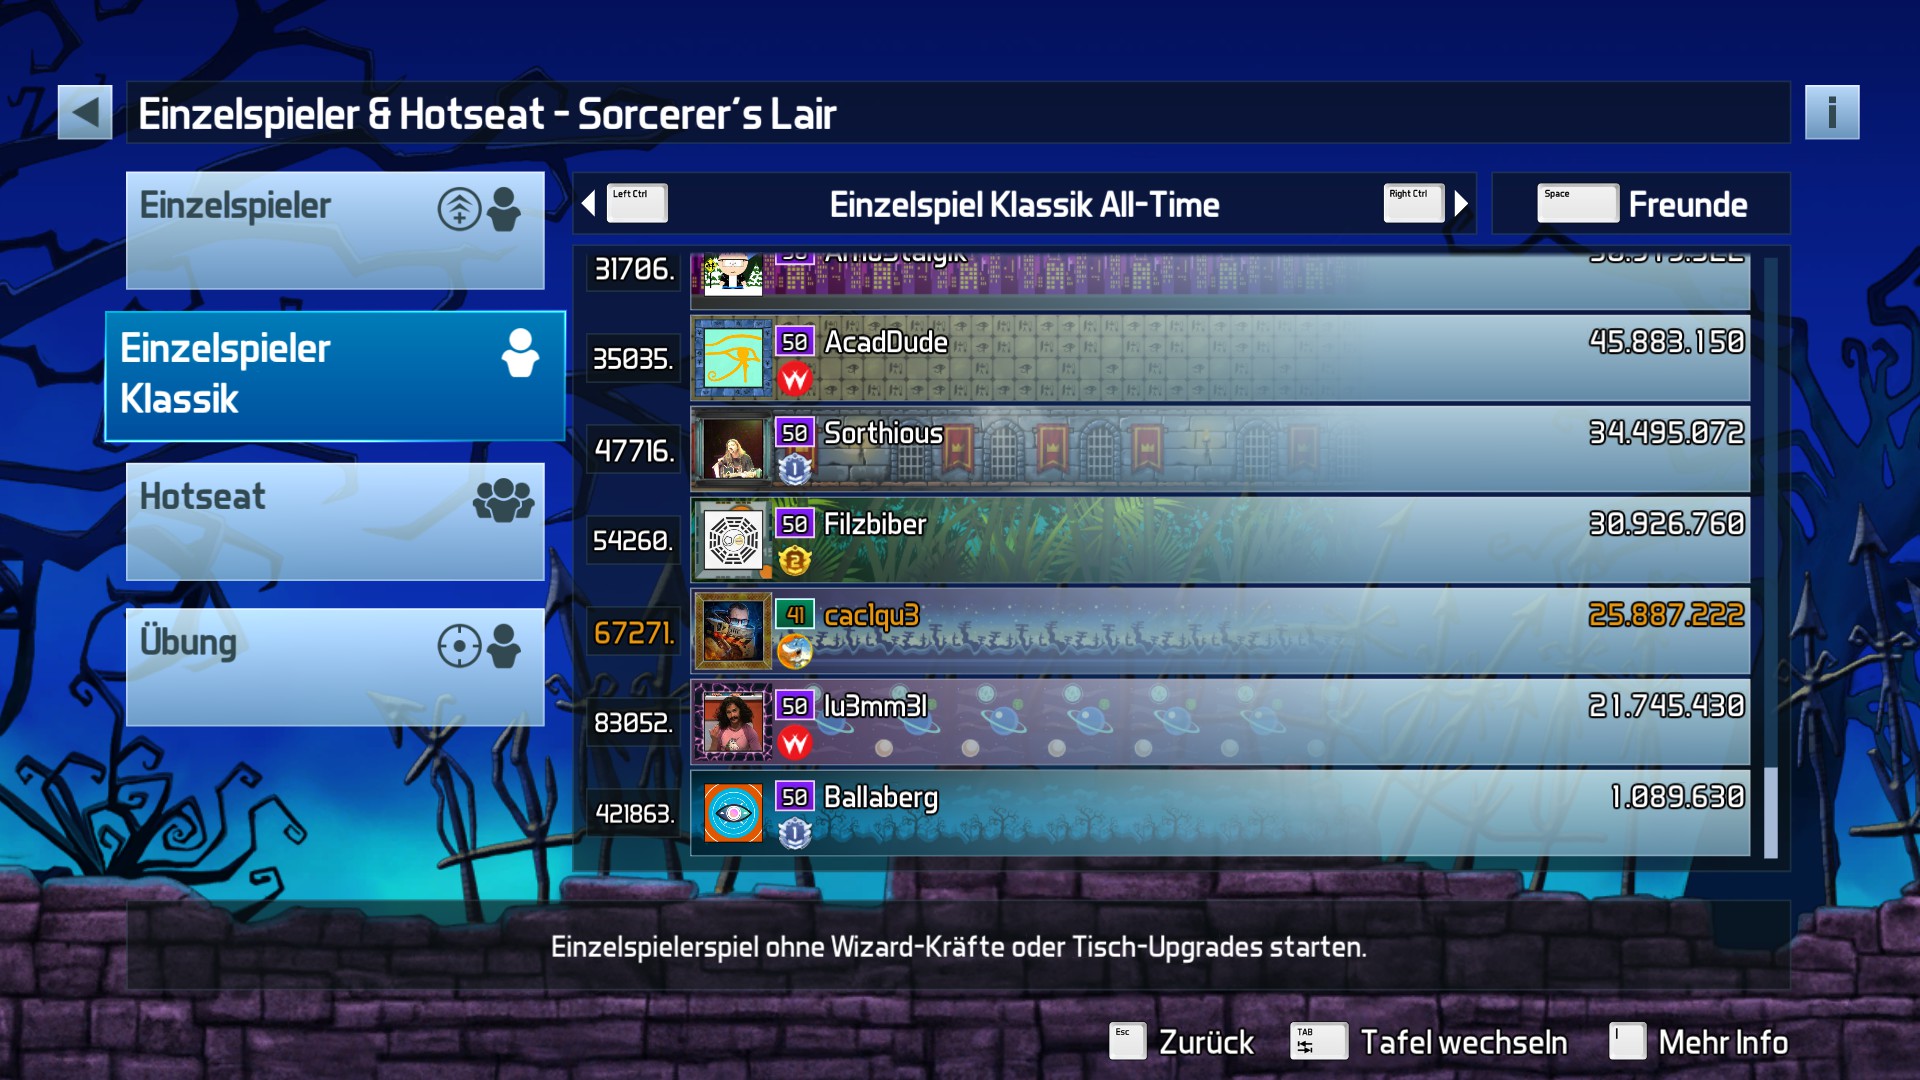 e2e4: Pinball FX3: Sorcerer’s Lair [Classic] (PC) 25,887,222 points on 2022-05-18 17:26:14